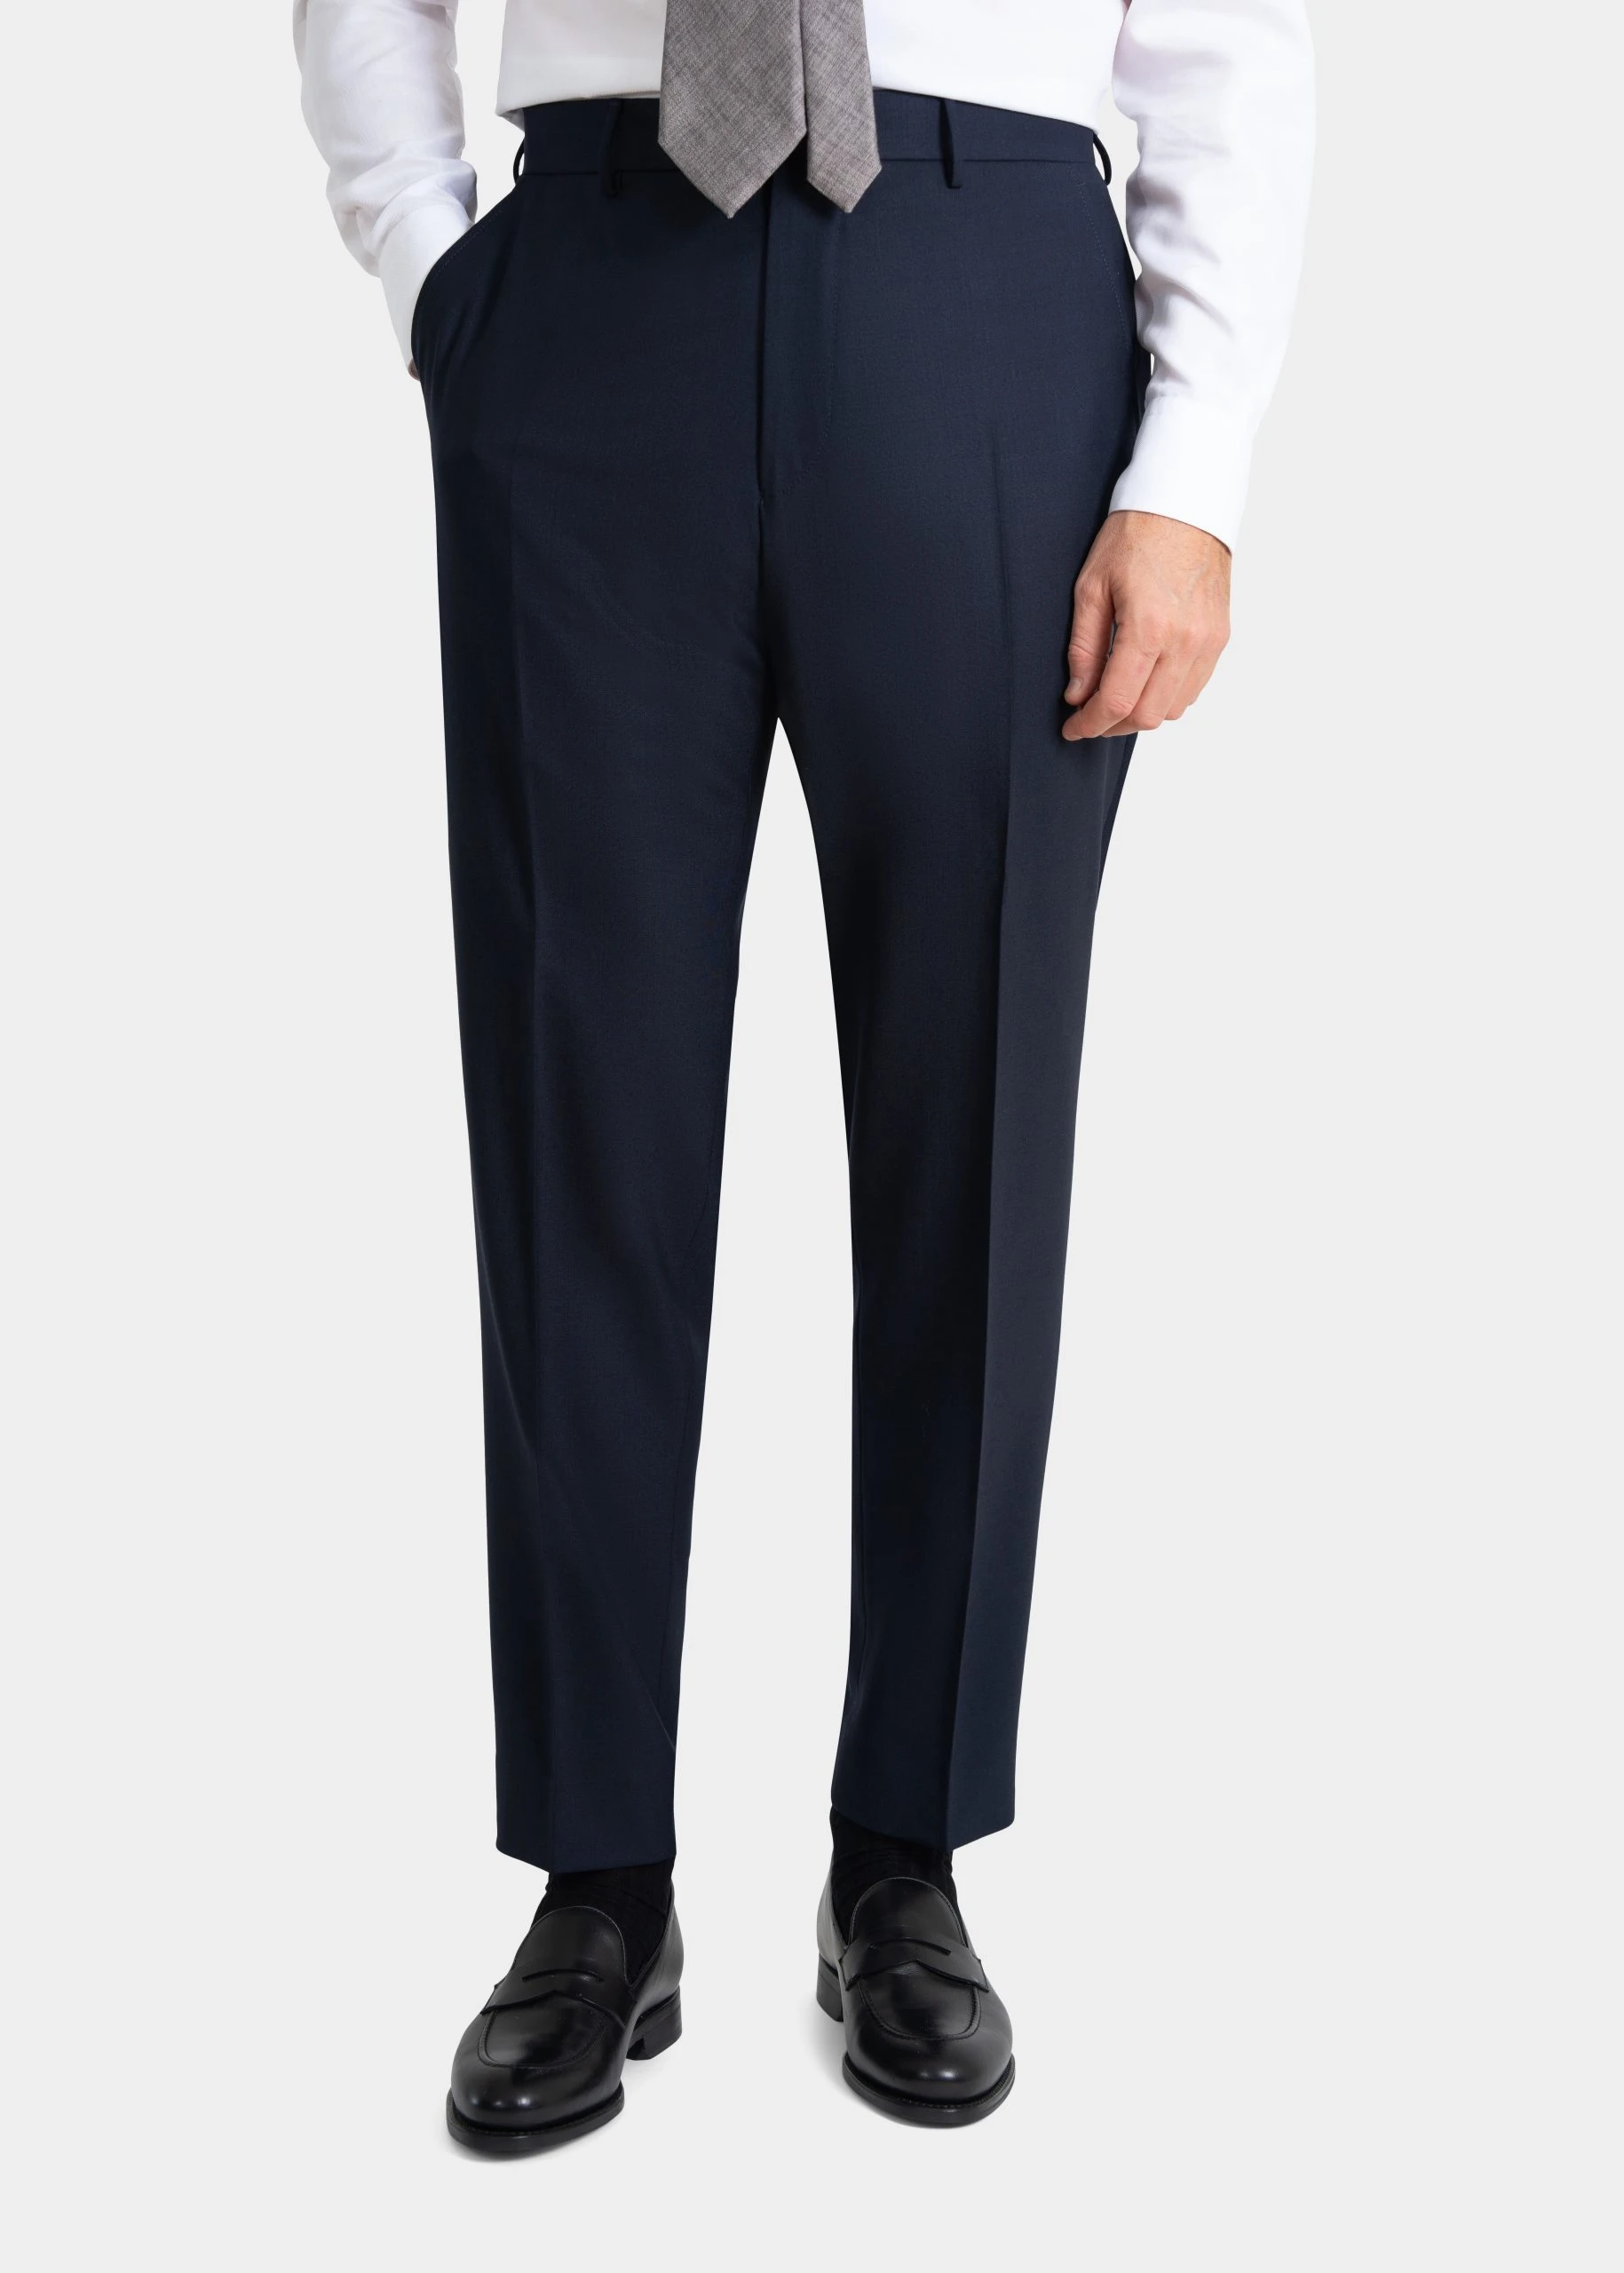 navy blue suit trousers in twistair fabric